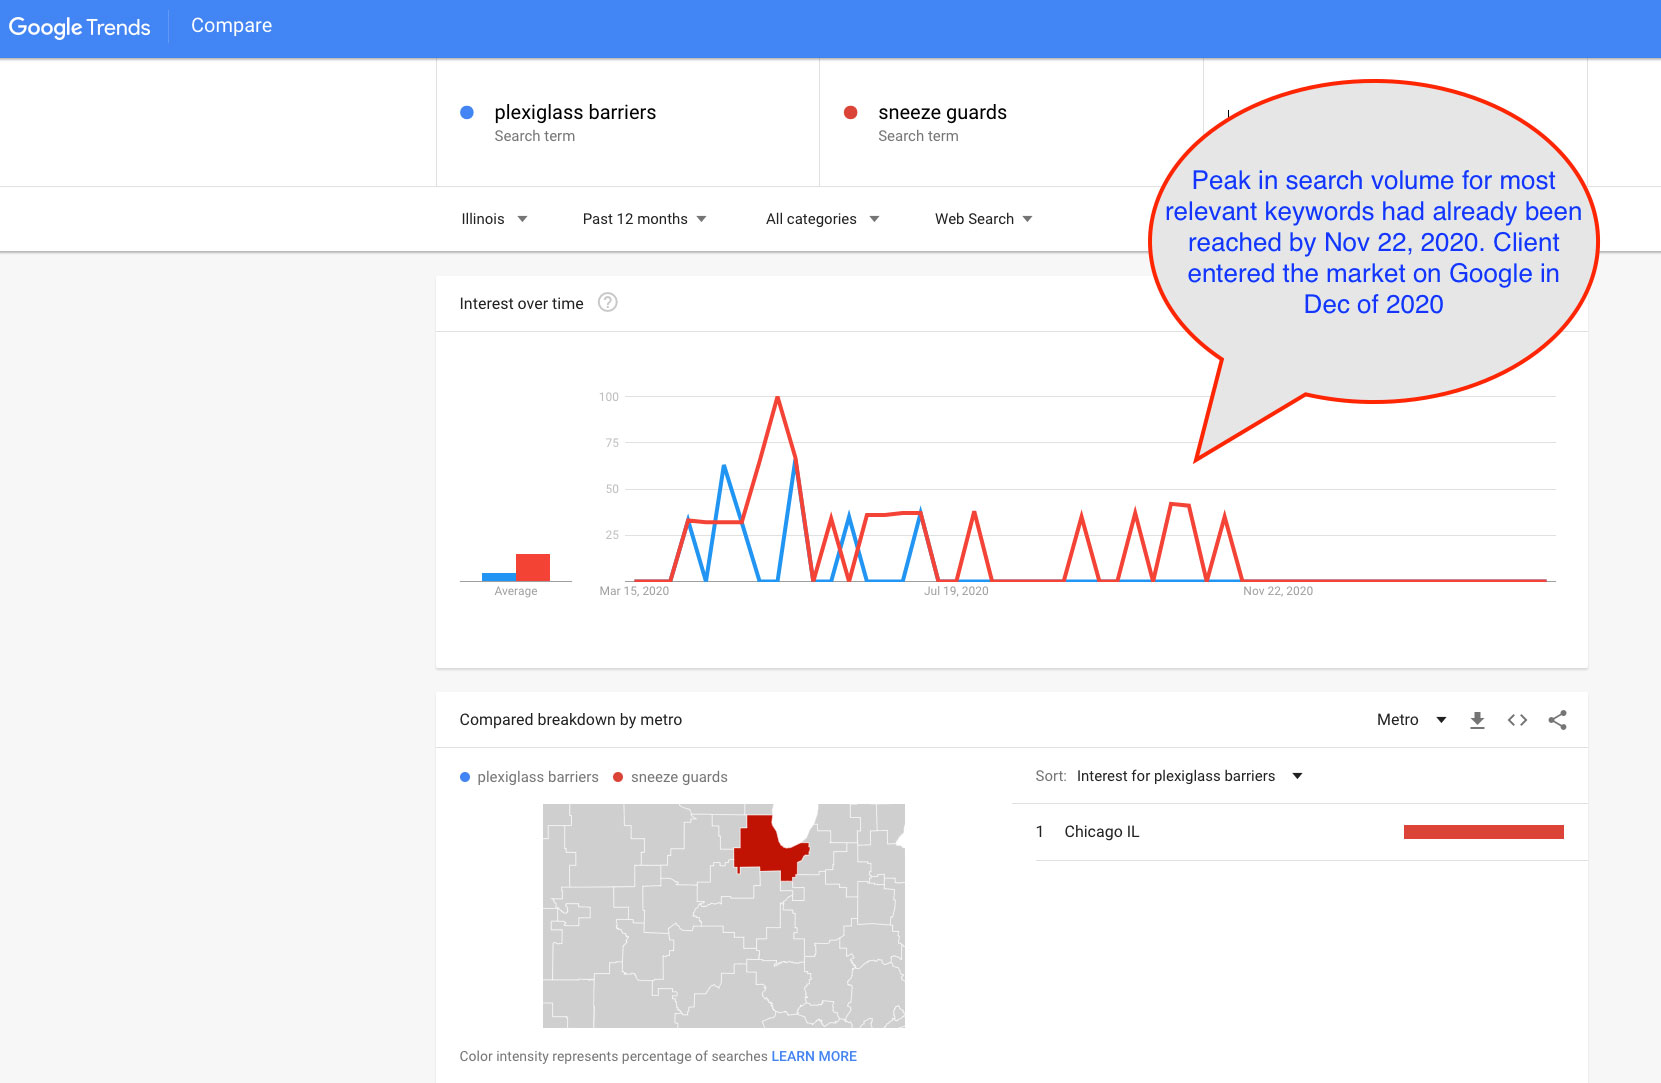 Google trends search volume shows the monthly search volume for the most important search terms. Don't blame Google for your business model that did not take this into account.